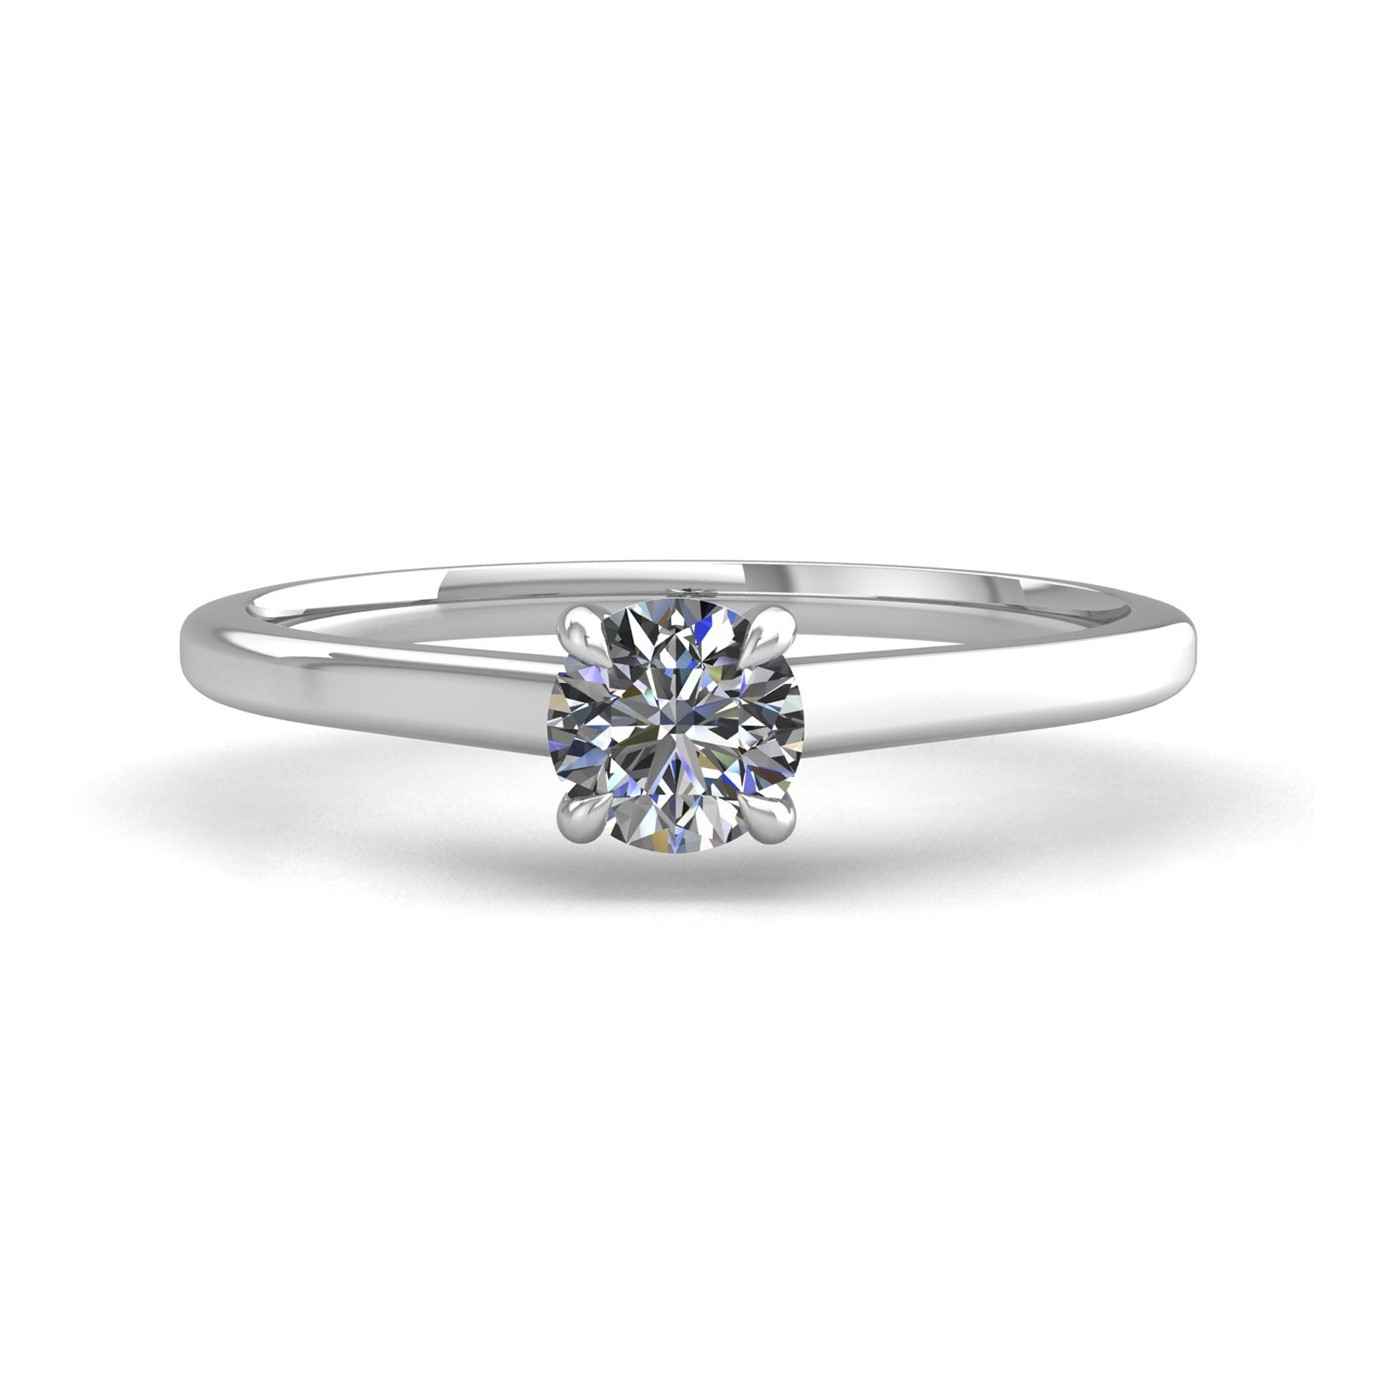 18k white gold 0,50 ct 4 prongs solitaire round cut diamond engagement ring with whisper thin band Photos & images